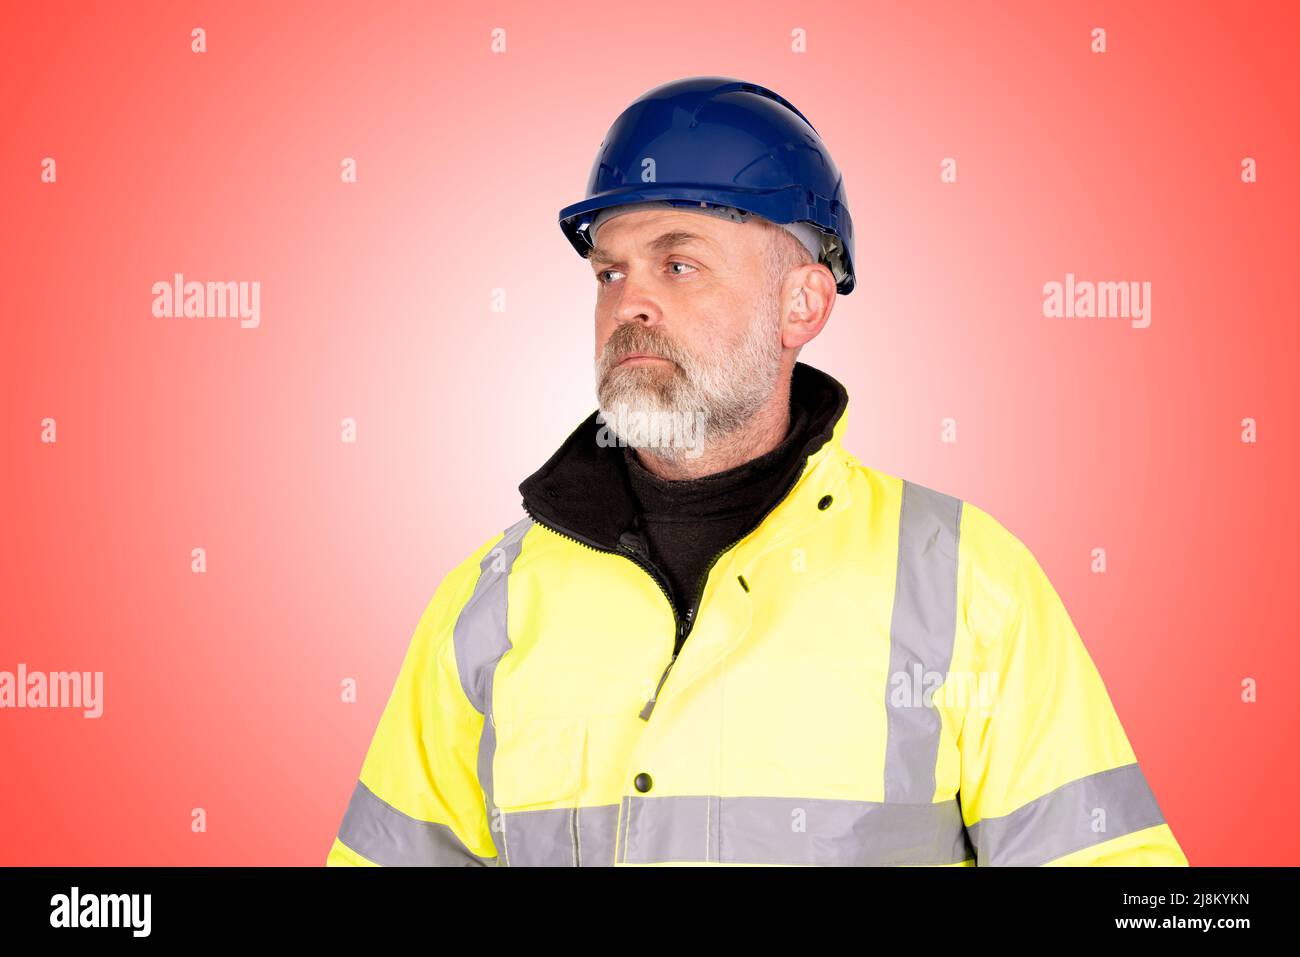 A construction worker in a blue hat and yellow hi-viz coat on a light red background Stock Photo